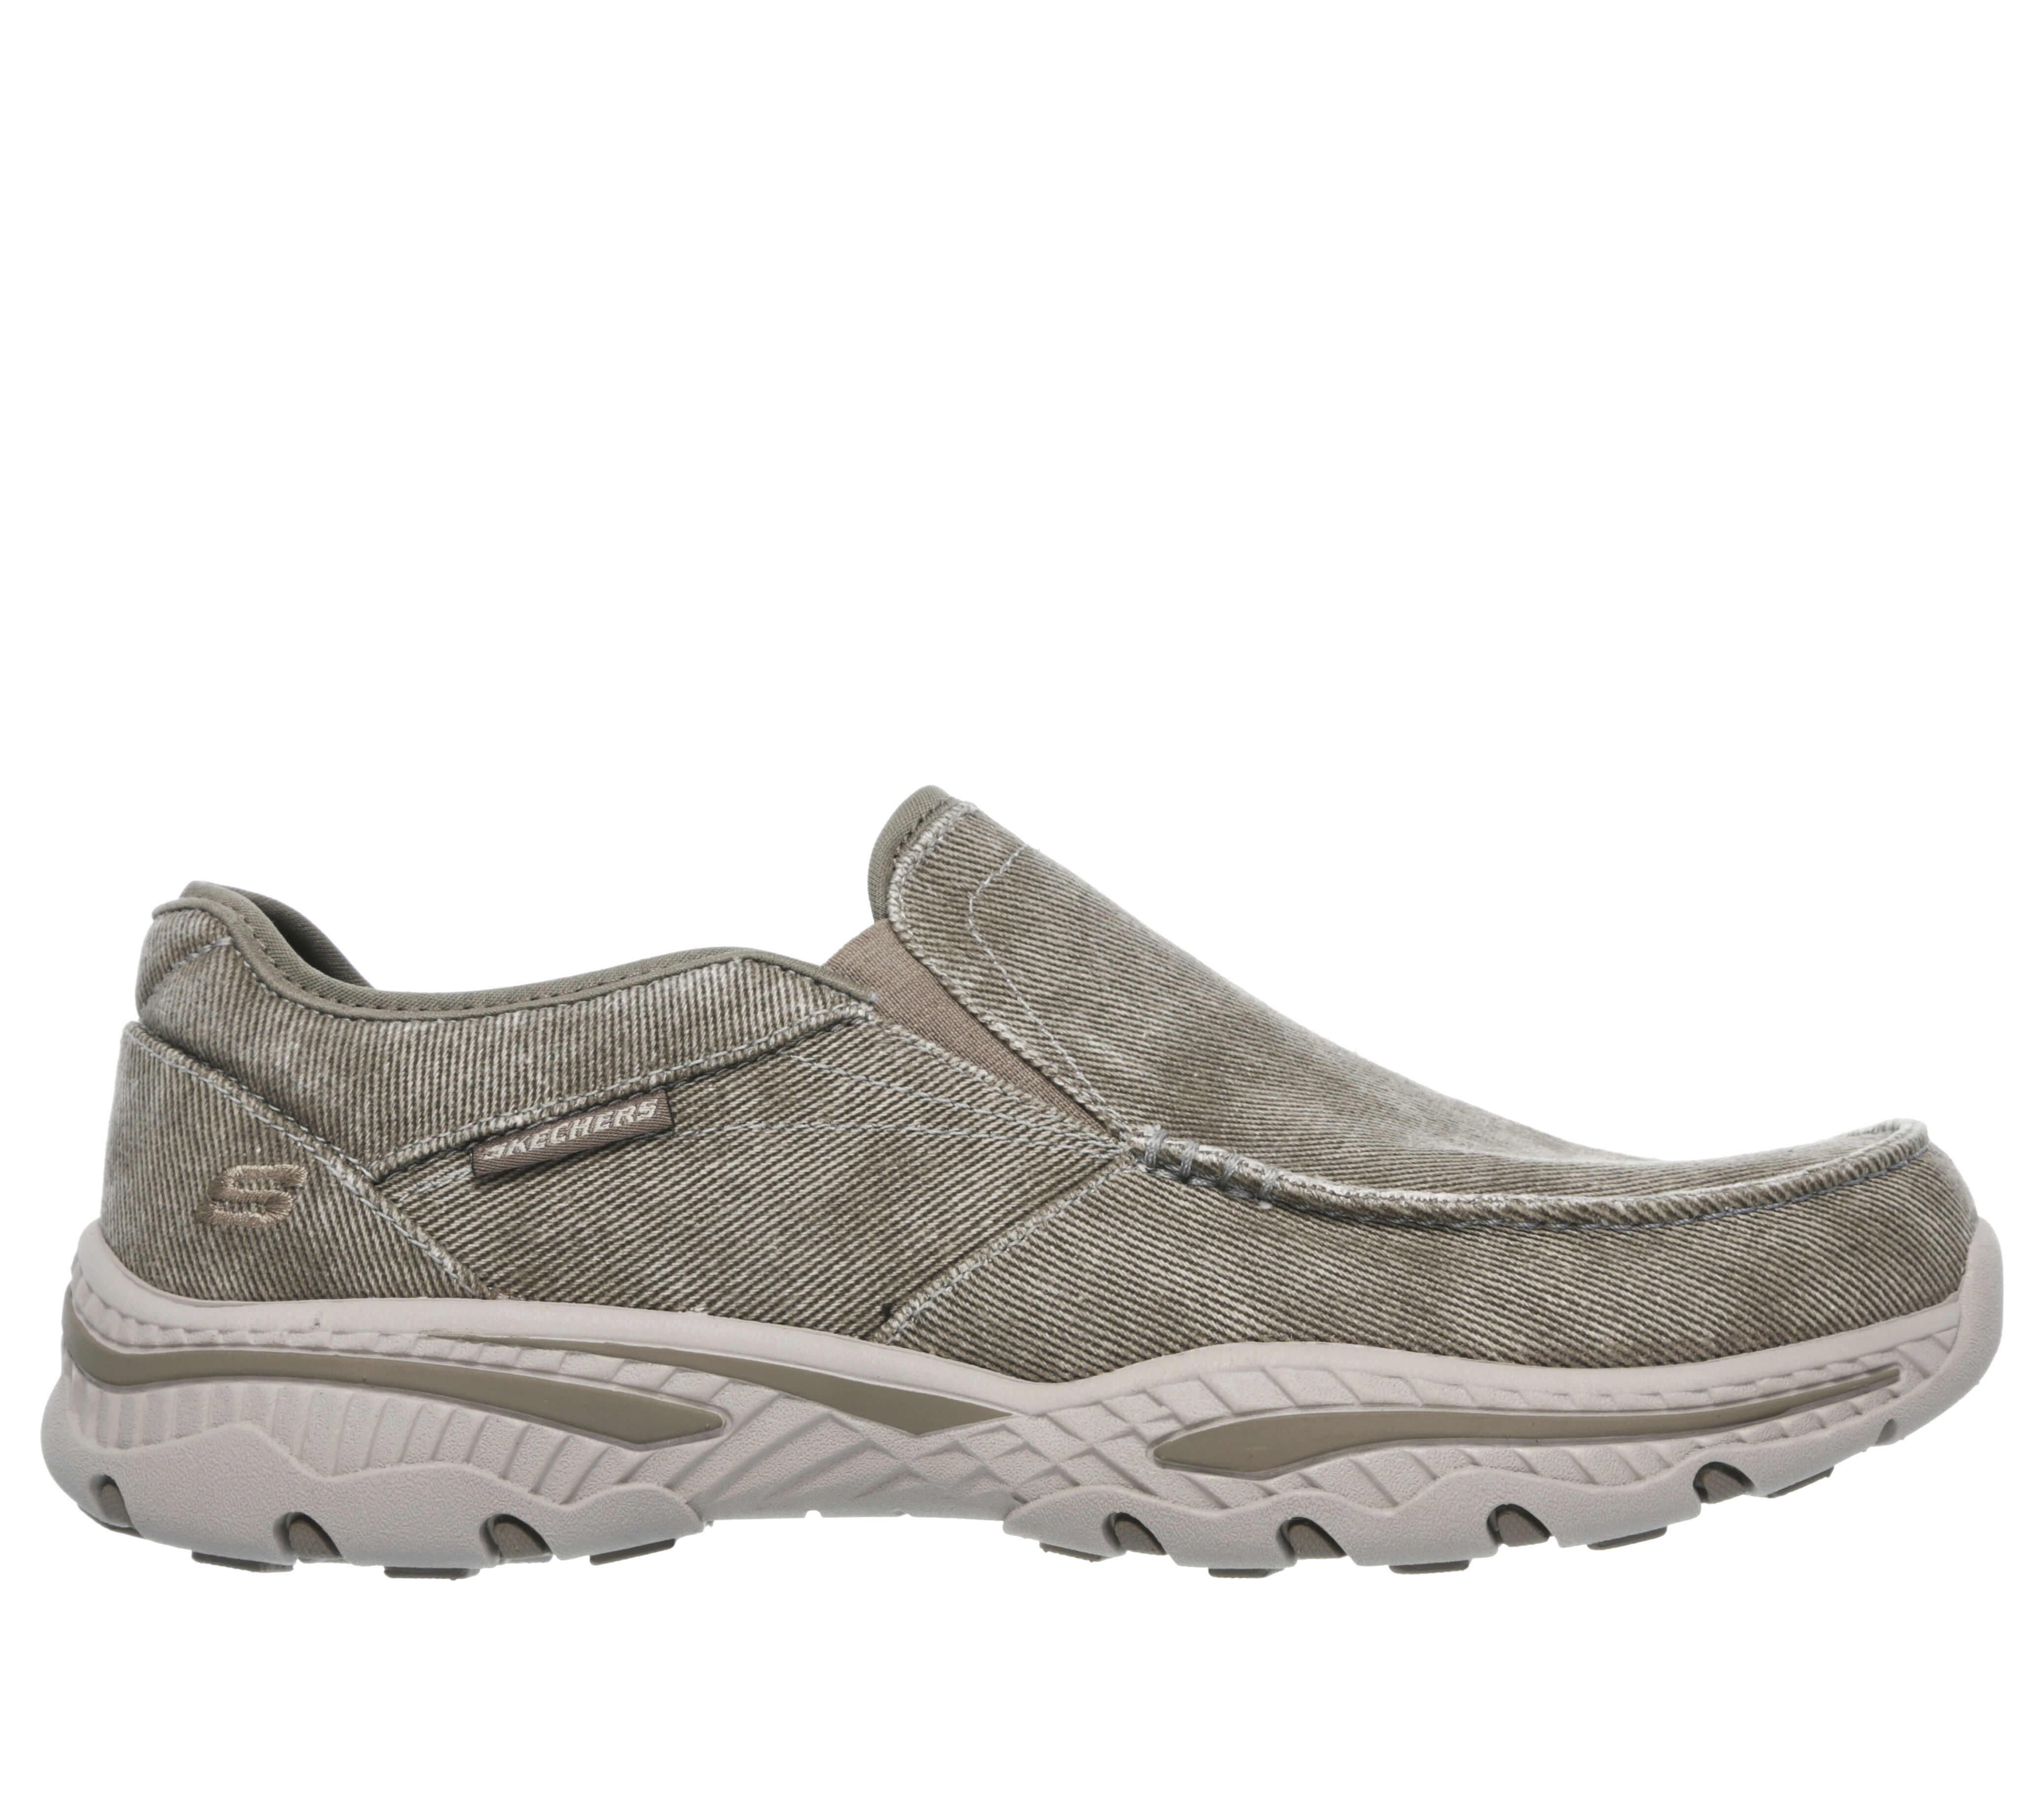 skechers size 14 extra wide